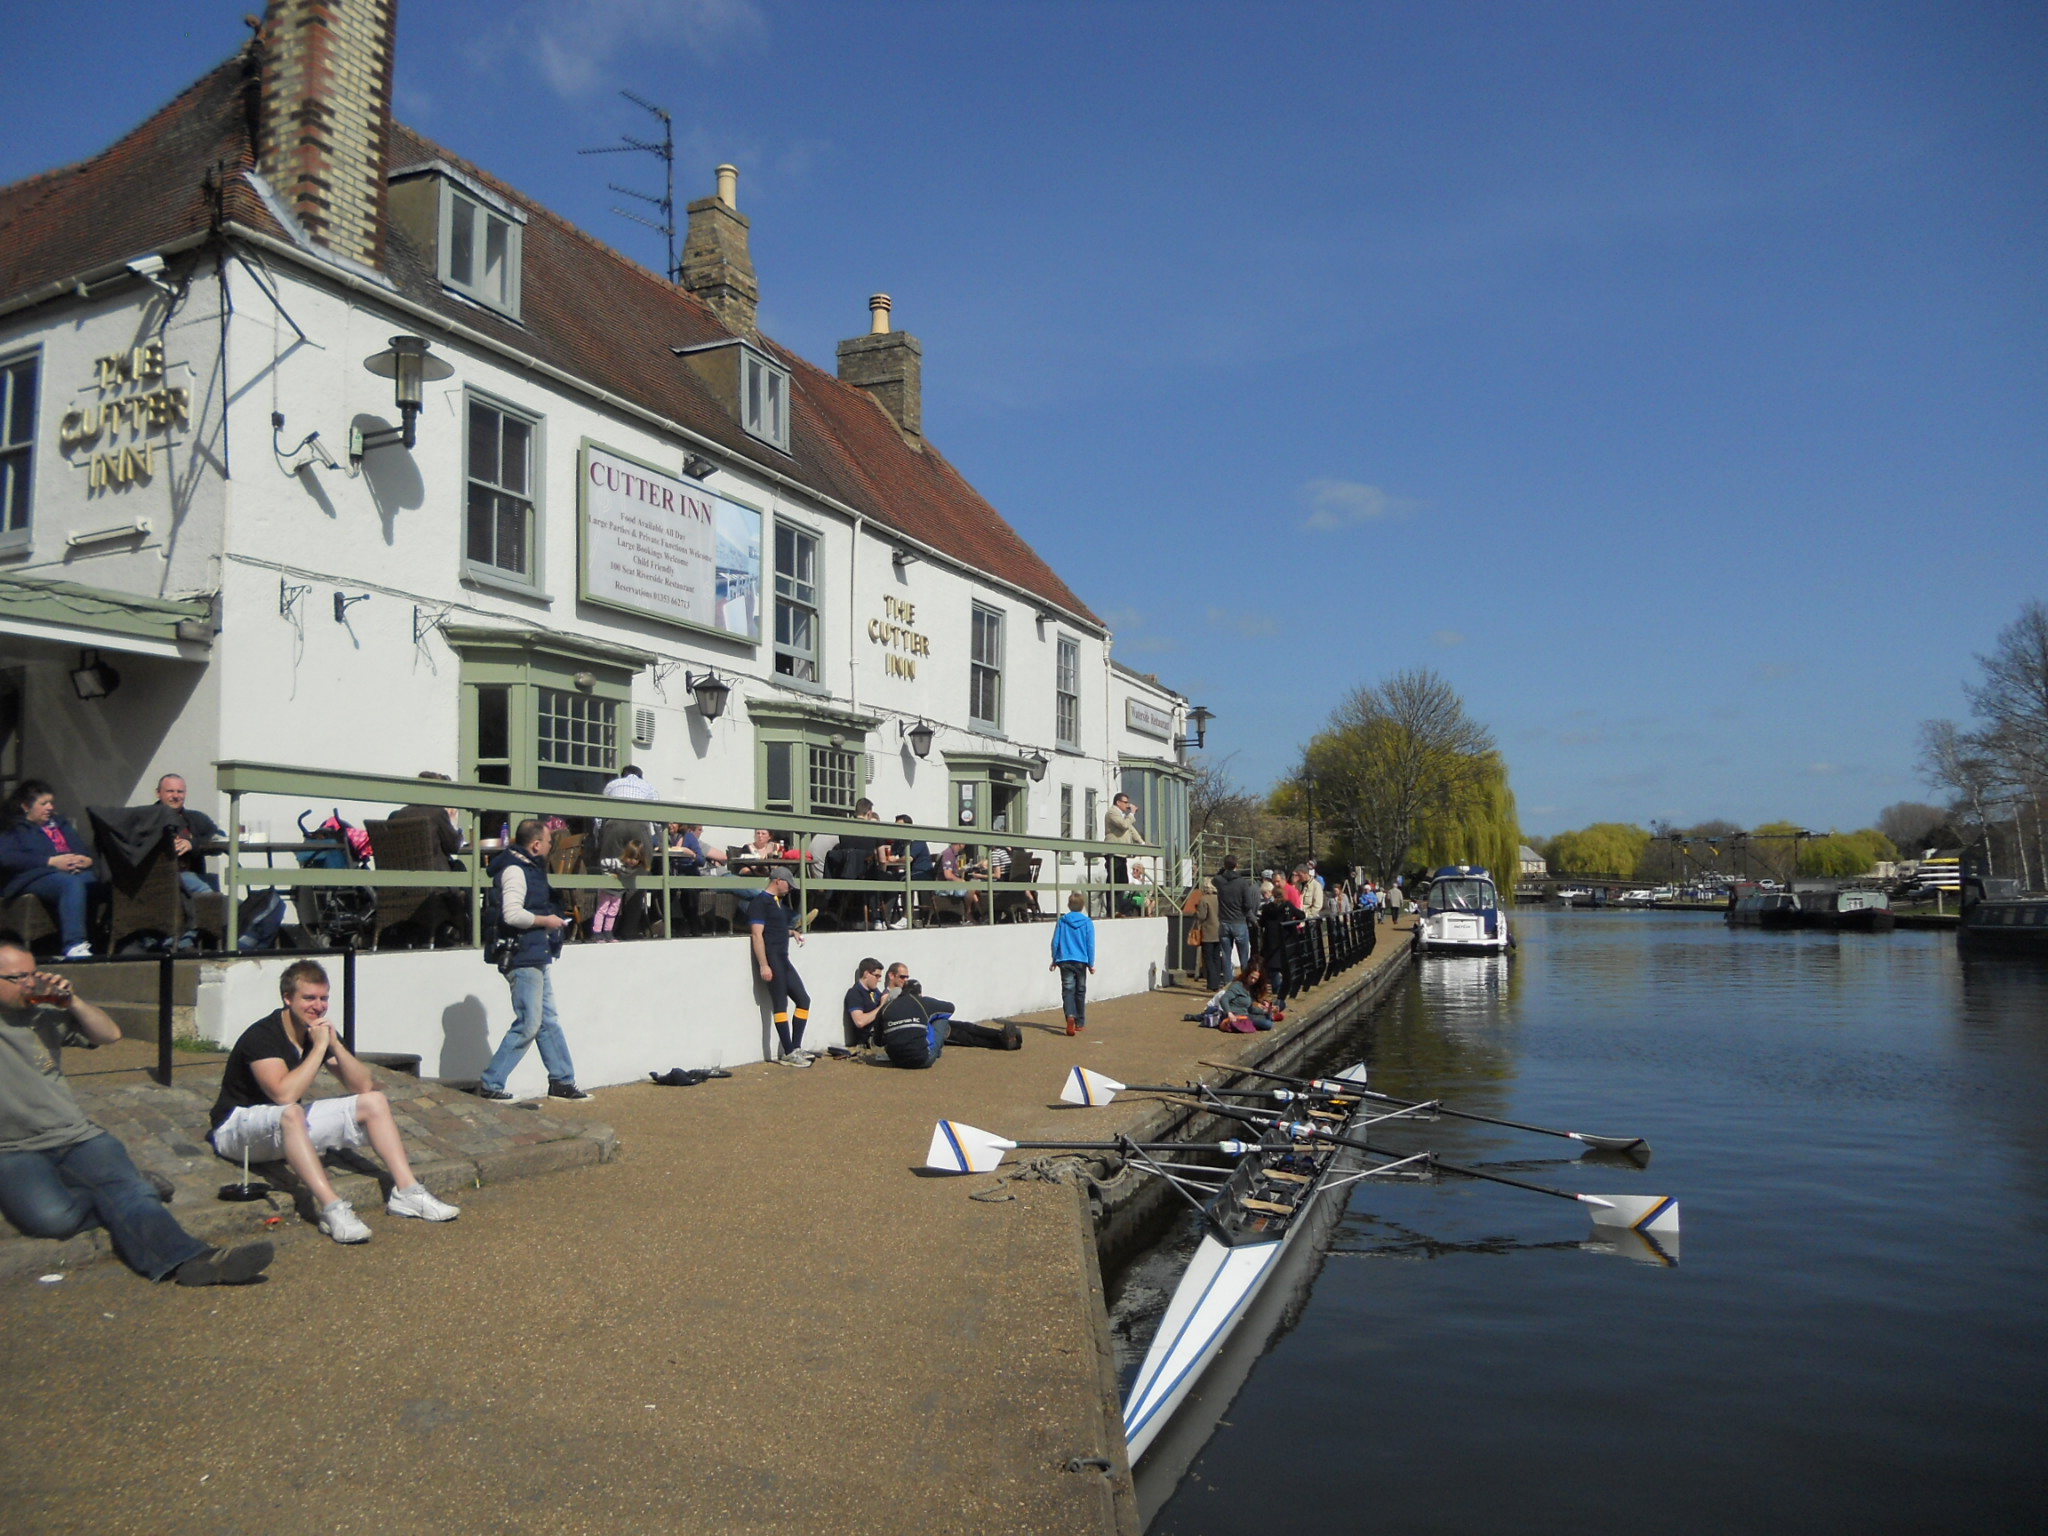 Creative Commons image of The Cutter Inn in Ely